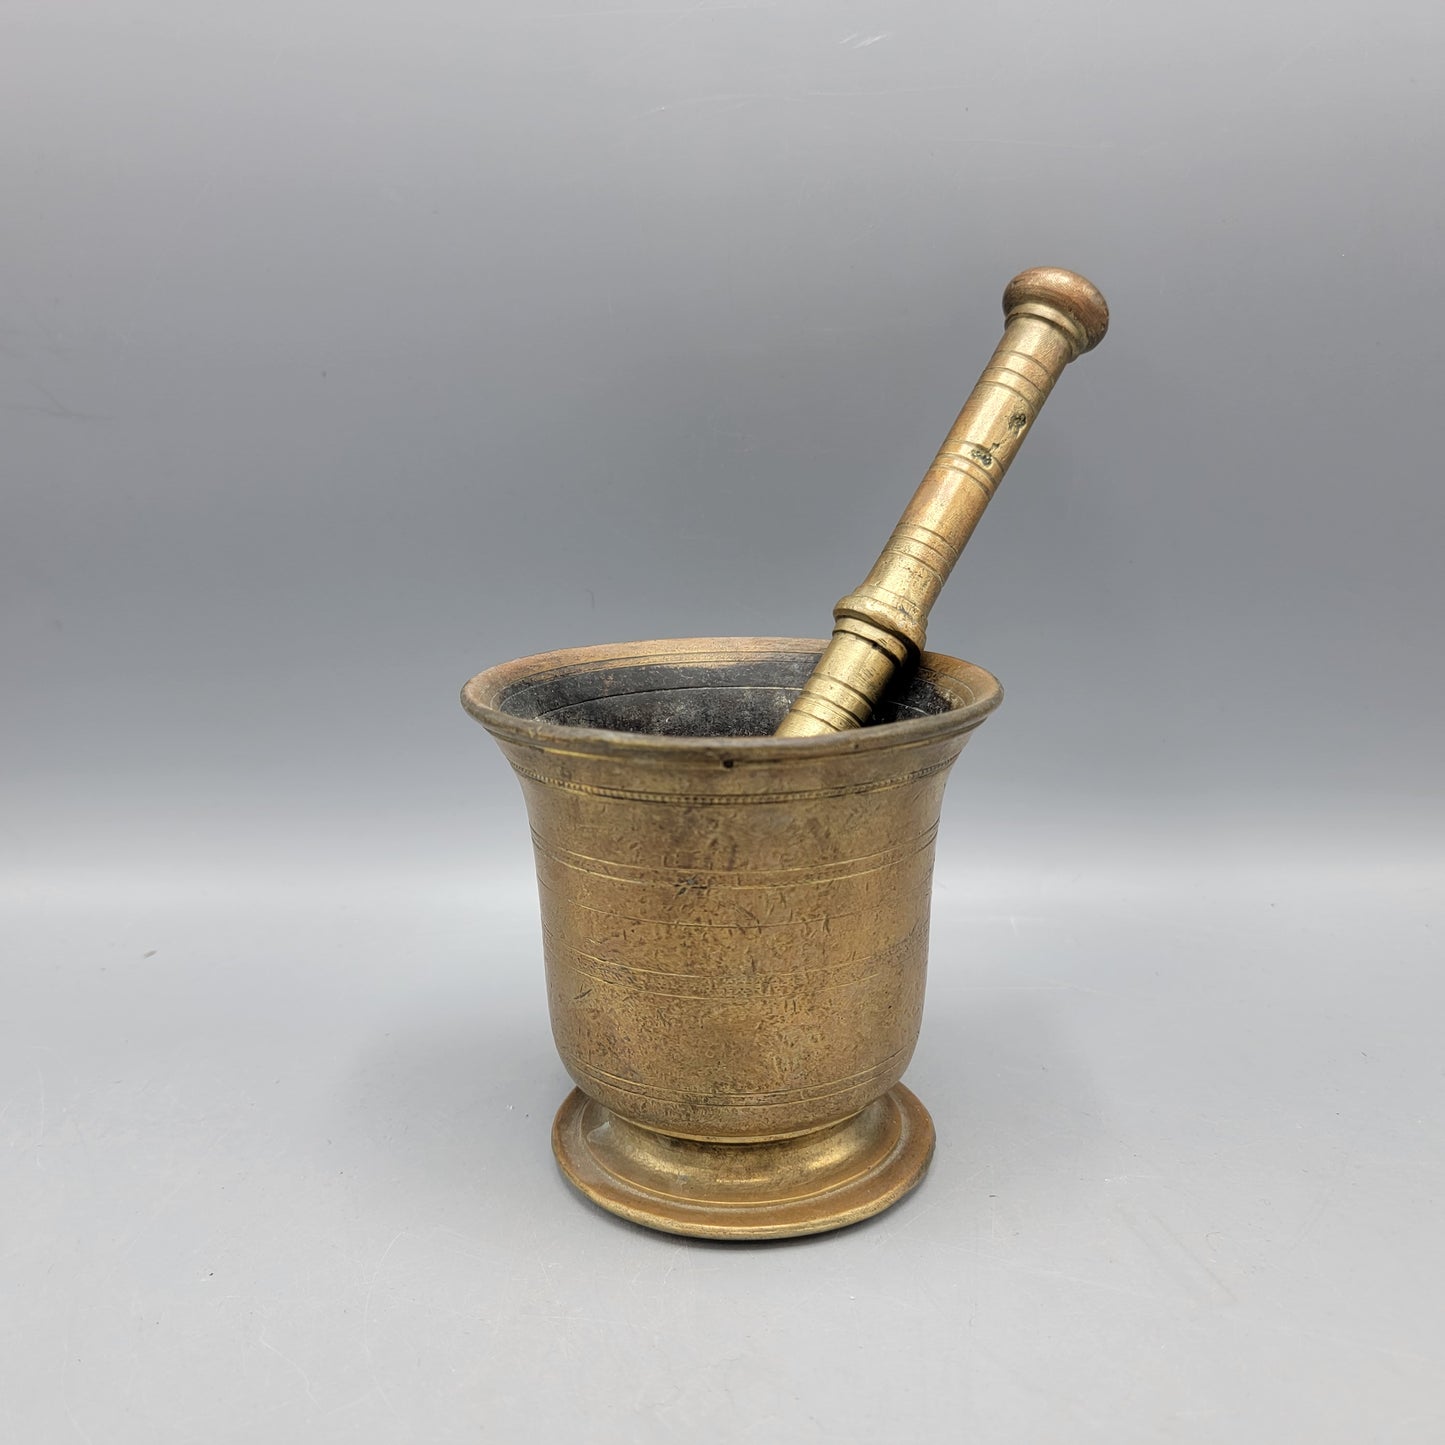 Antique Brass Bell-Form Mortar and Pestle